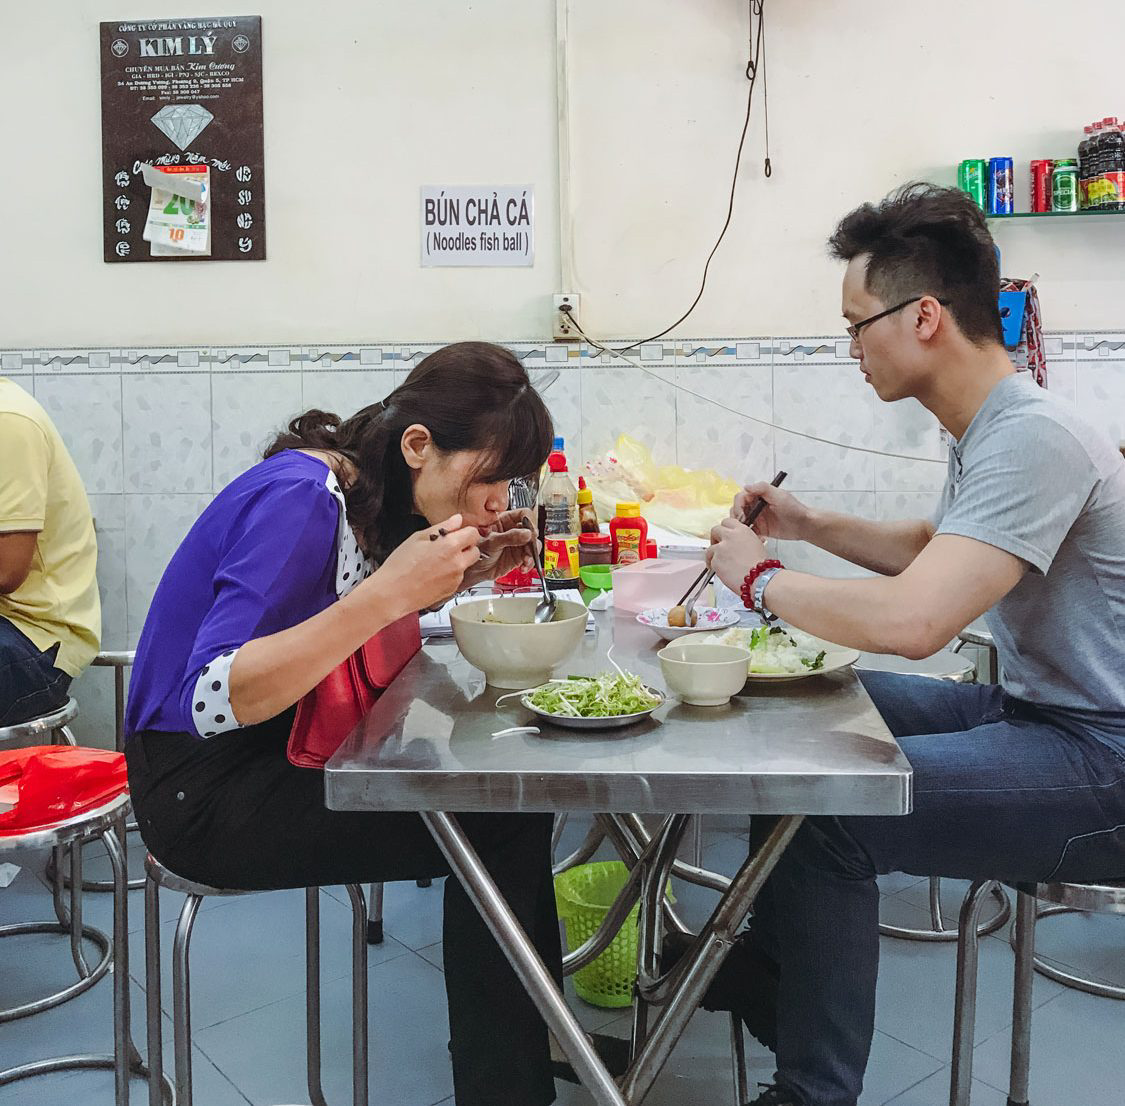 Two people enjoying their food at a small table.